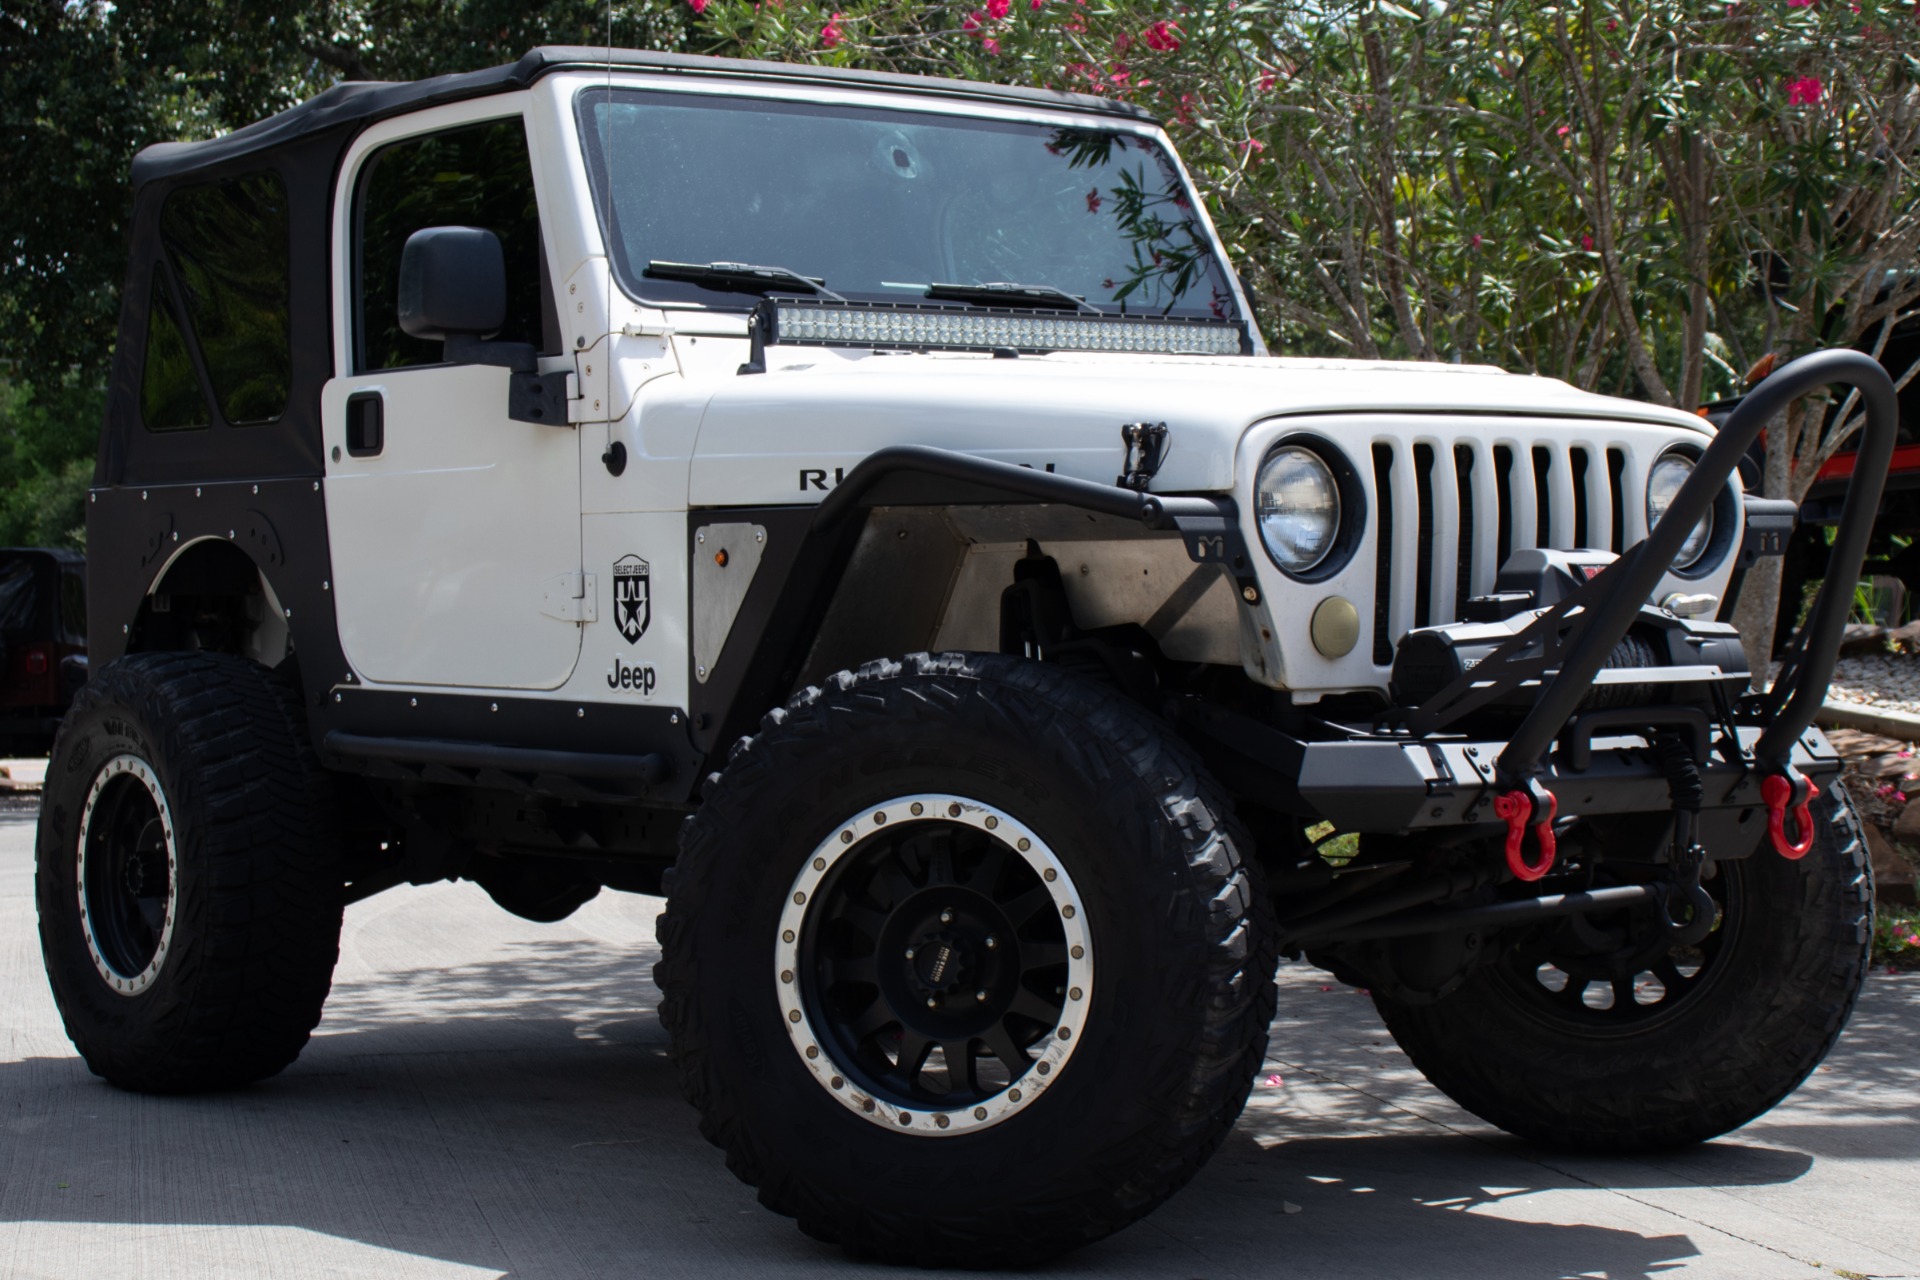 Used 2004 Jeep Wrangler Rubicon For Sale ($12,995) | Select Jeeps Inc.  Stock #785717